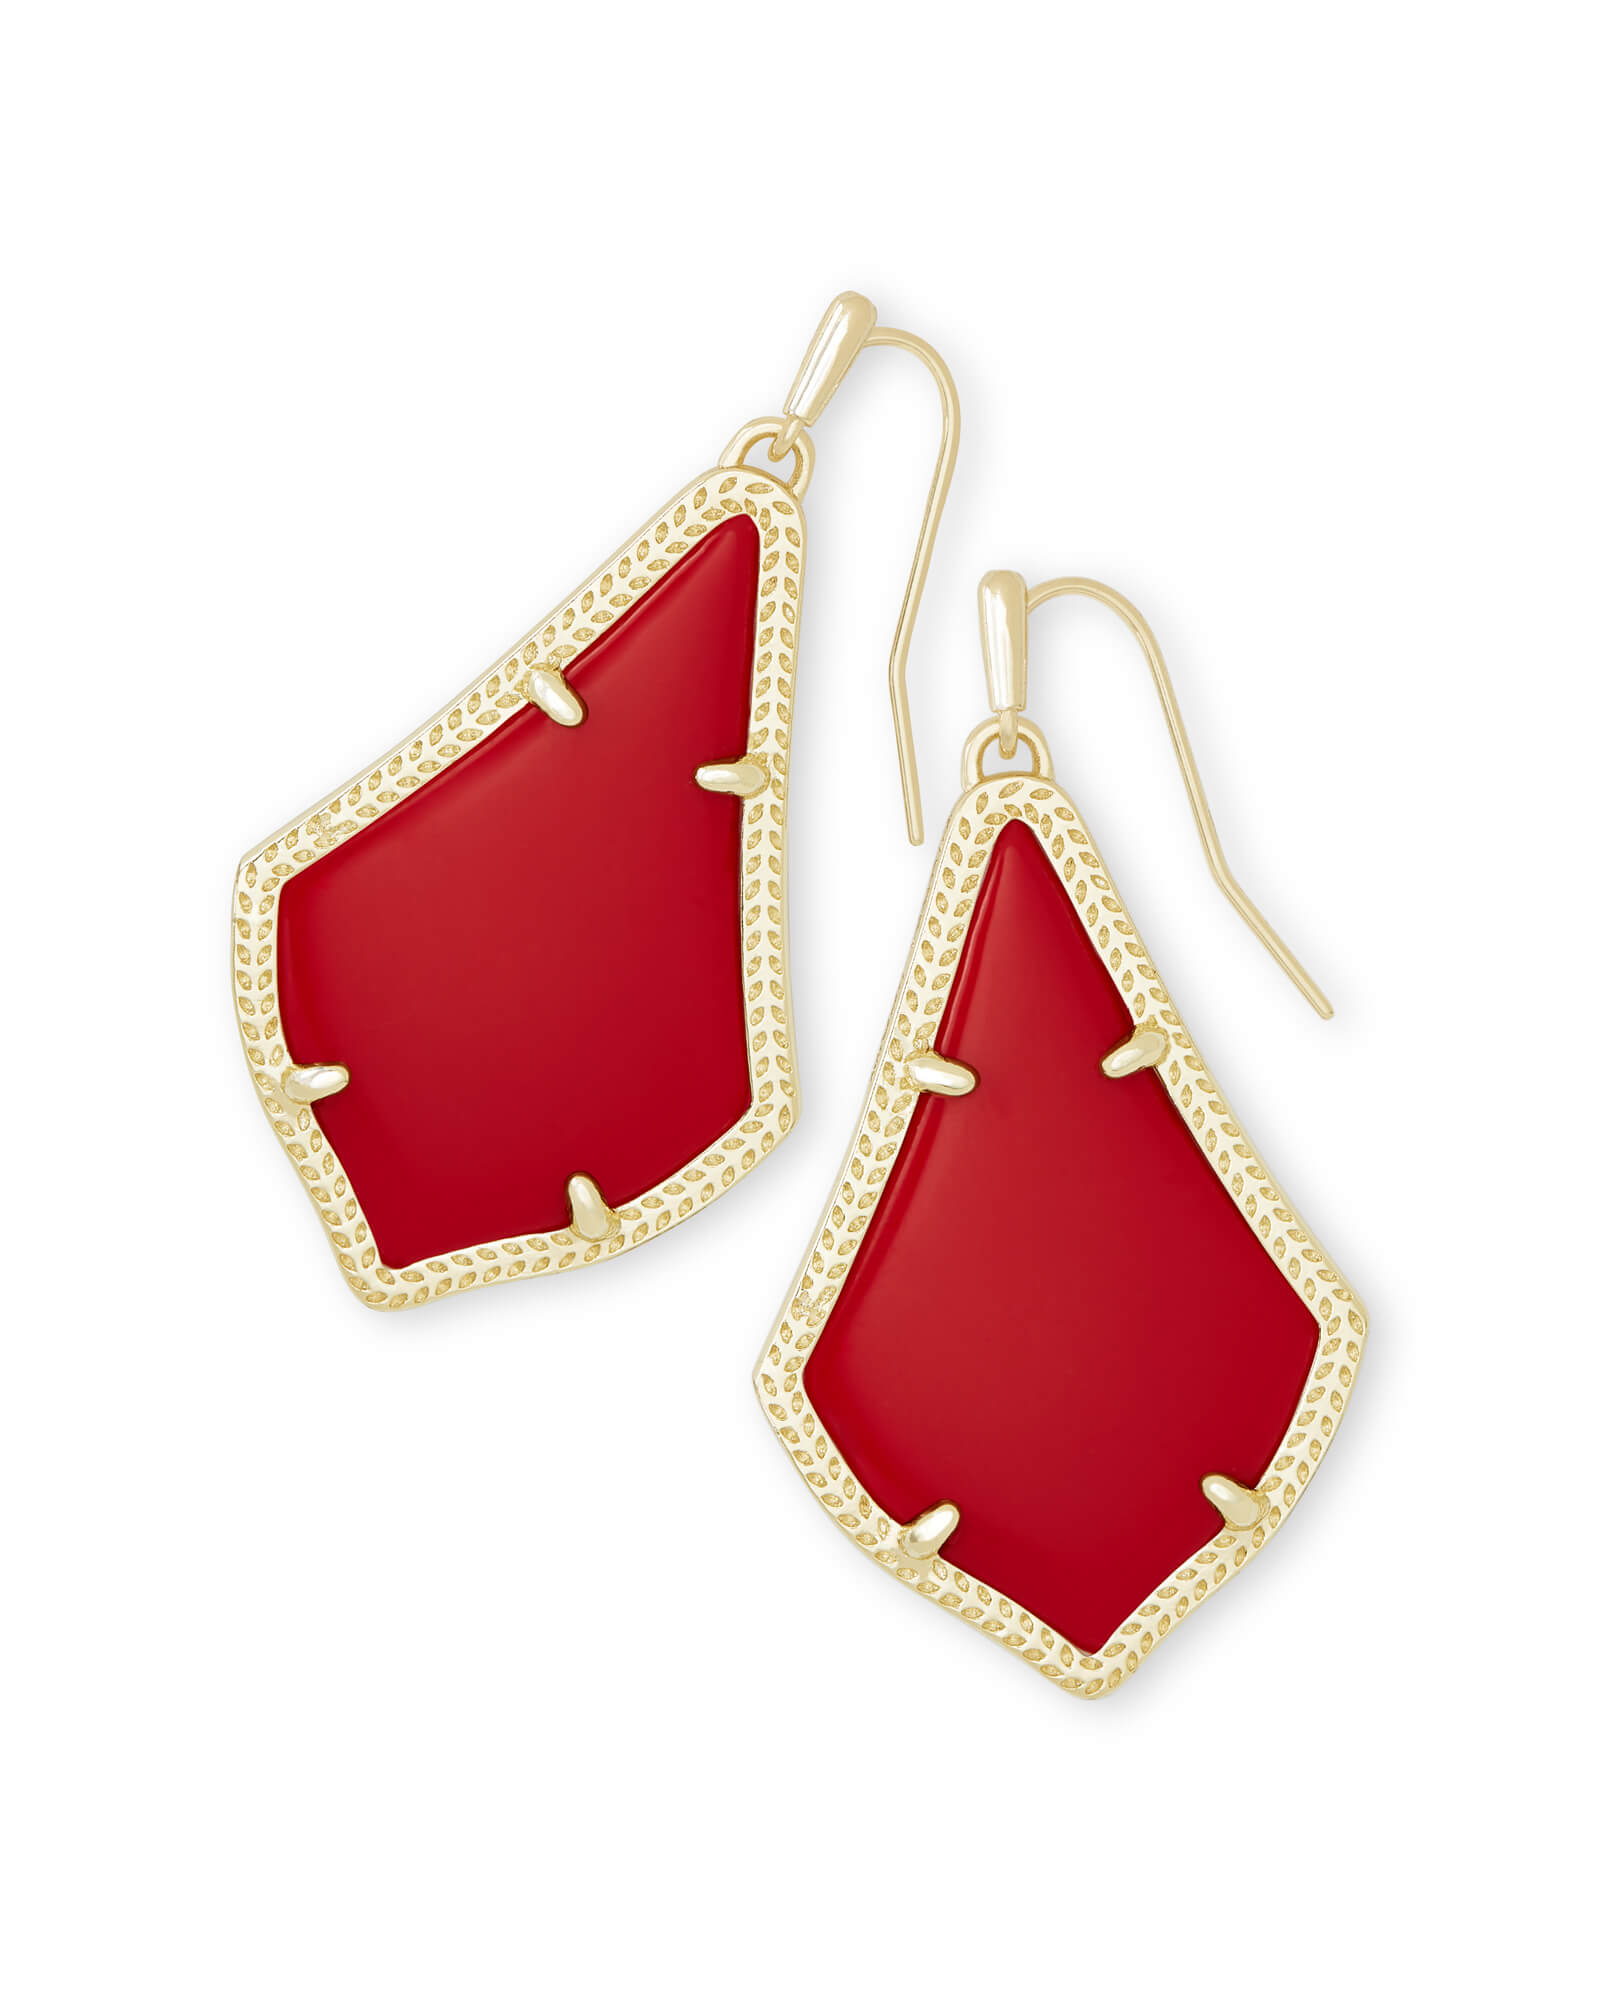 Alex Gold Drop Earrings in Bright Red Opaque Glass